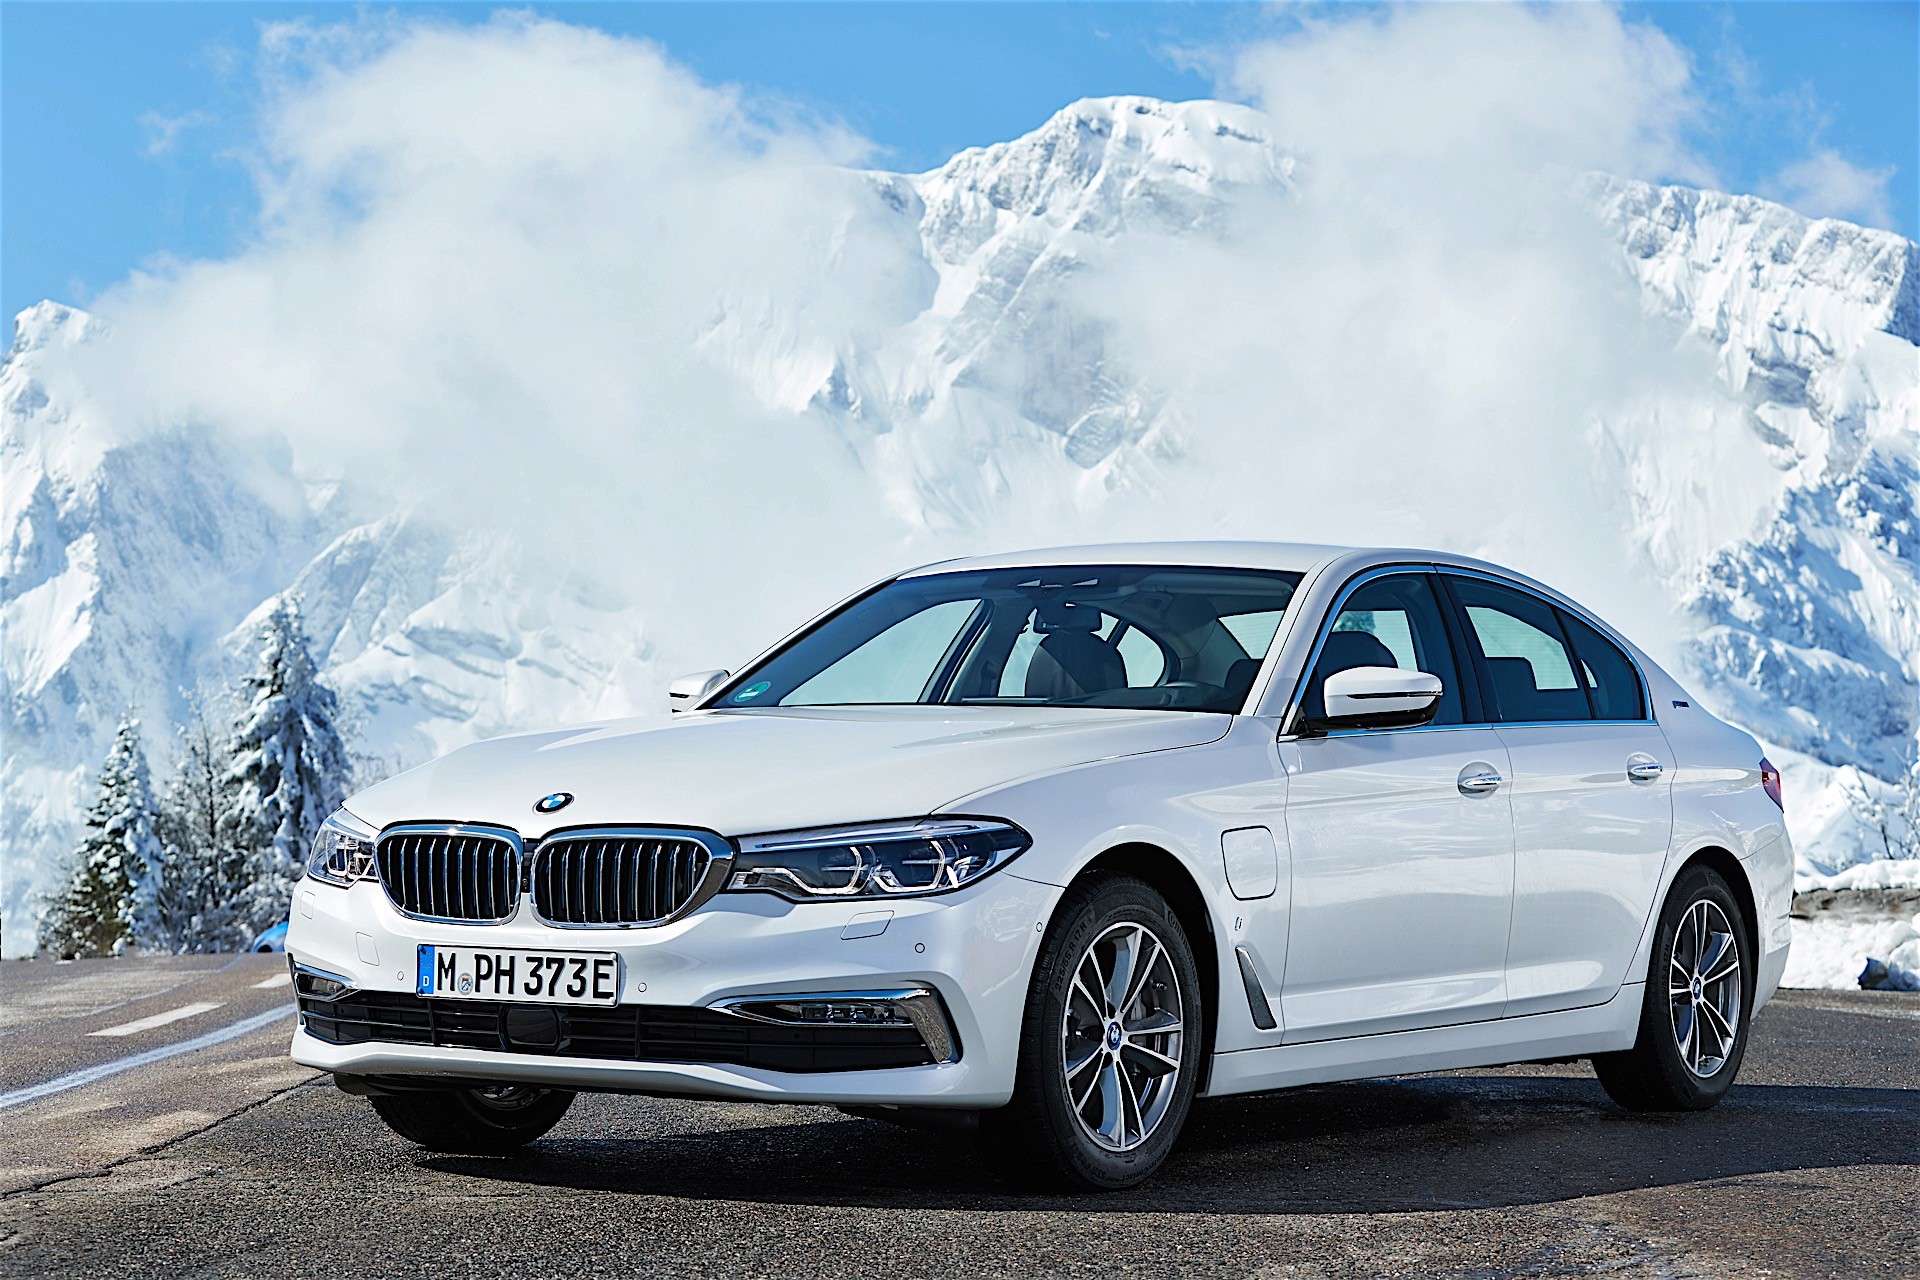 BMW 530e iPerformance Unveiled, It's A PHEV With 252 HP And Great Fuel